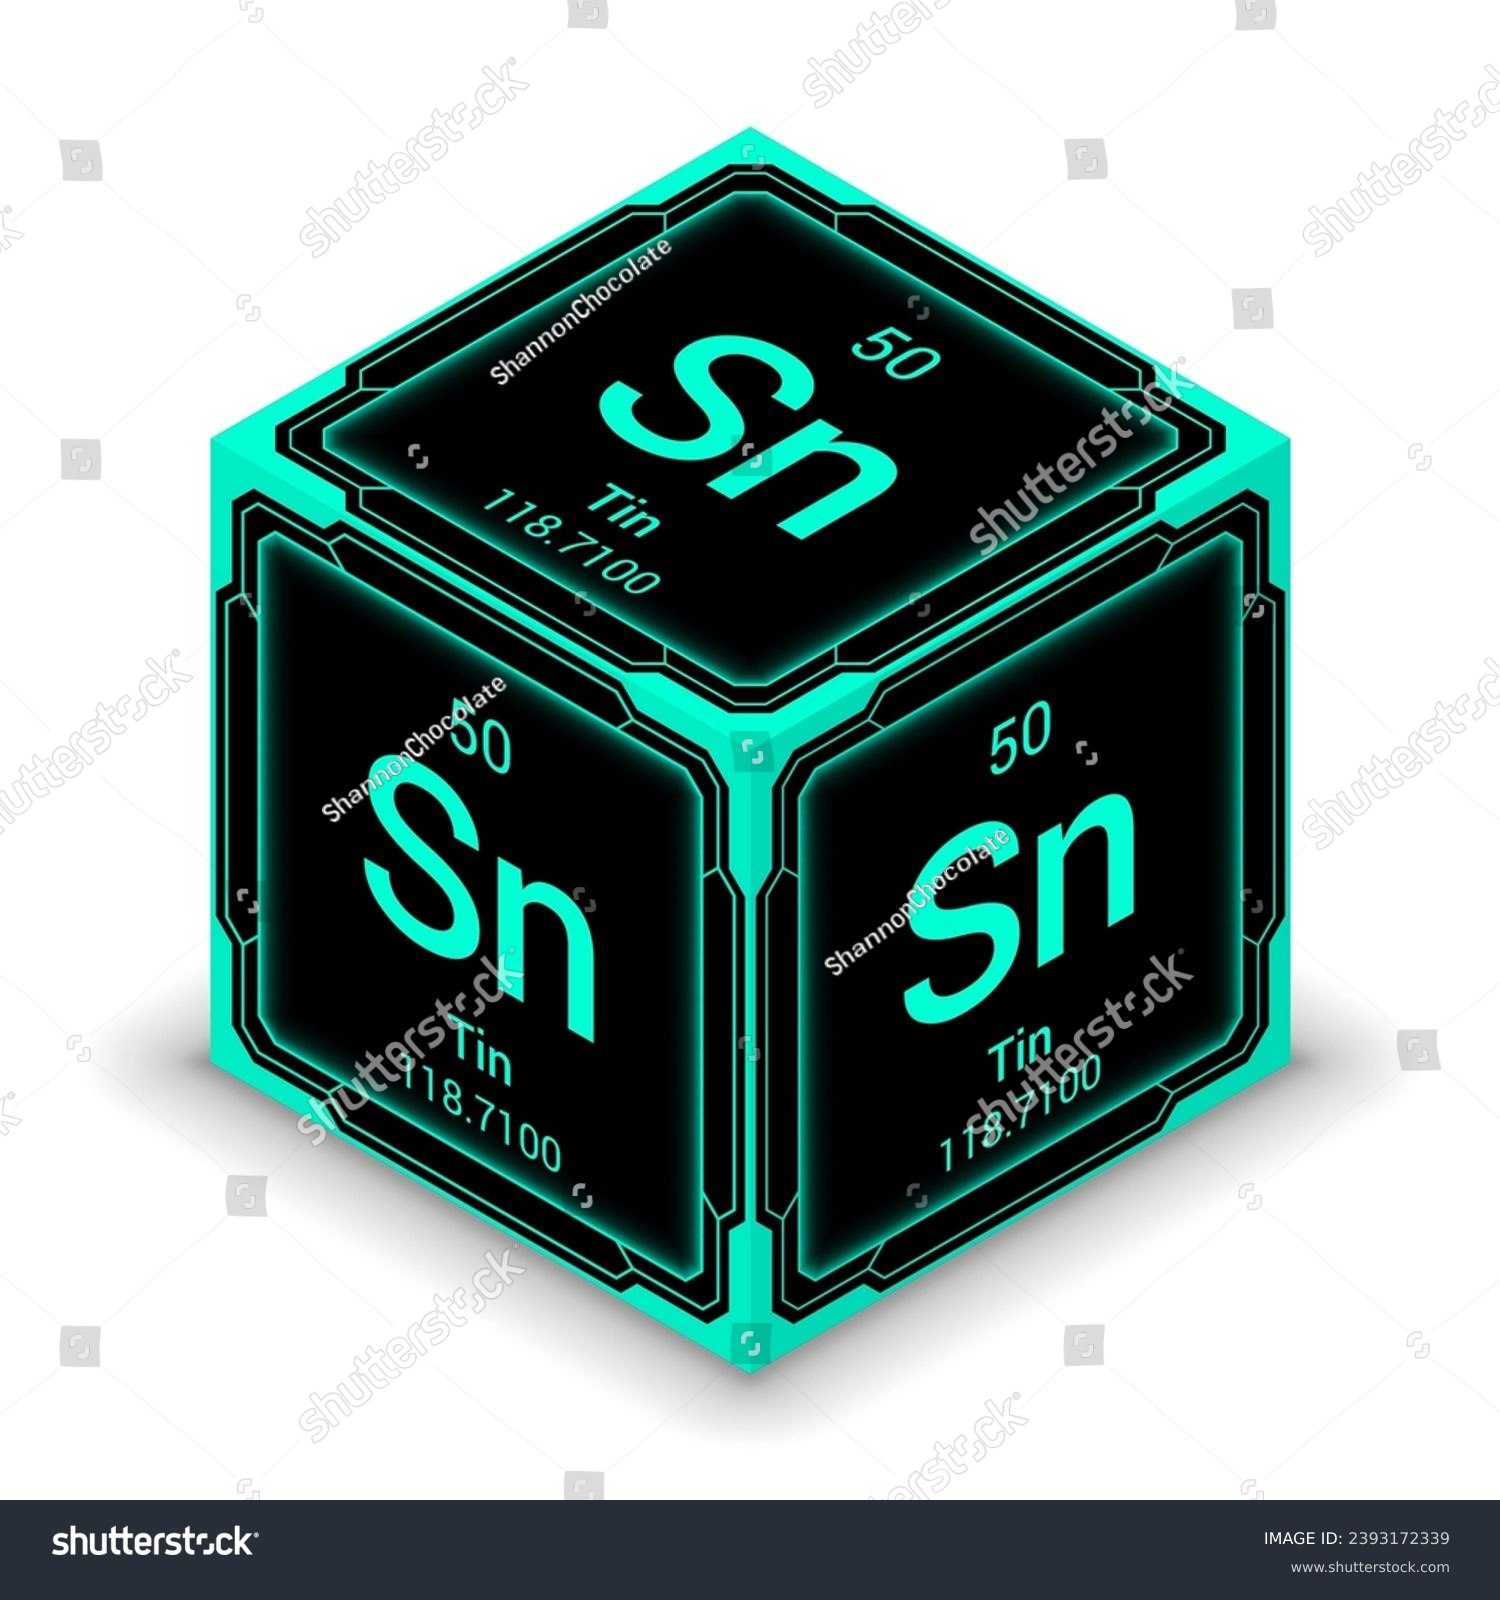 SVG of Tin (Sn) (050) - Fundamental Element Futuristic Cybernetic Cube Block Isometric View, Icon Isolated White Background, Periodic Table, Chemical Symbol, Name, Atomic Mass, Atomic Number svg